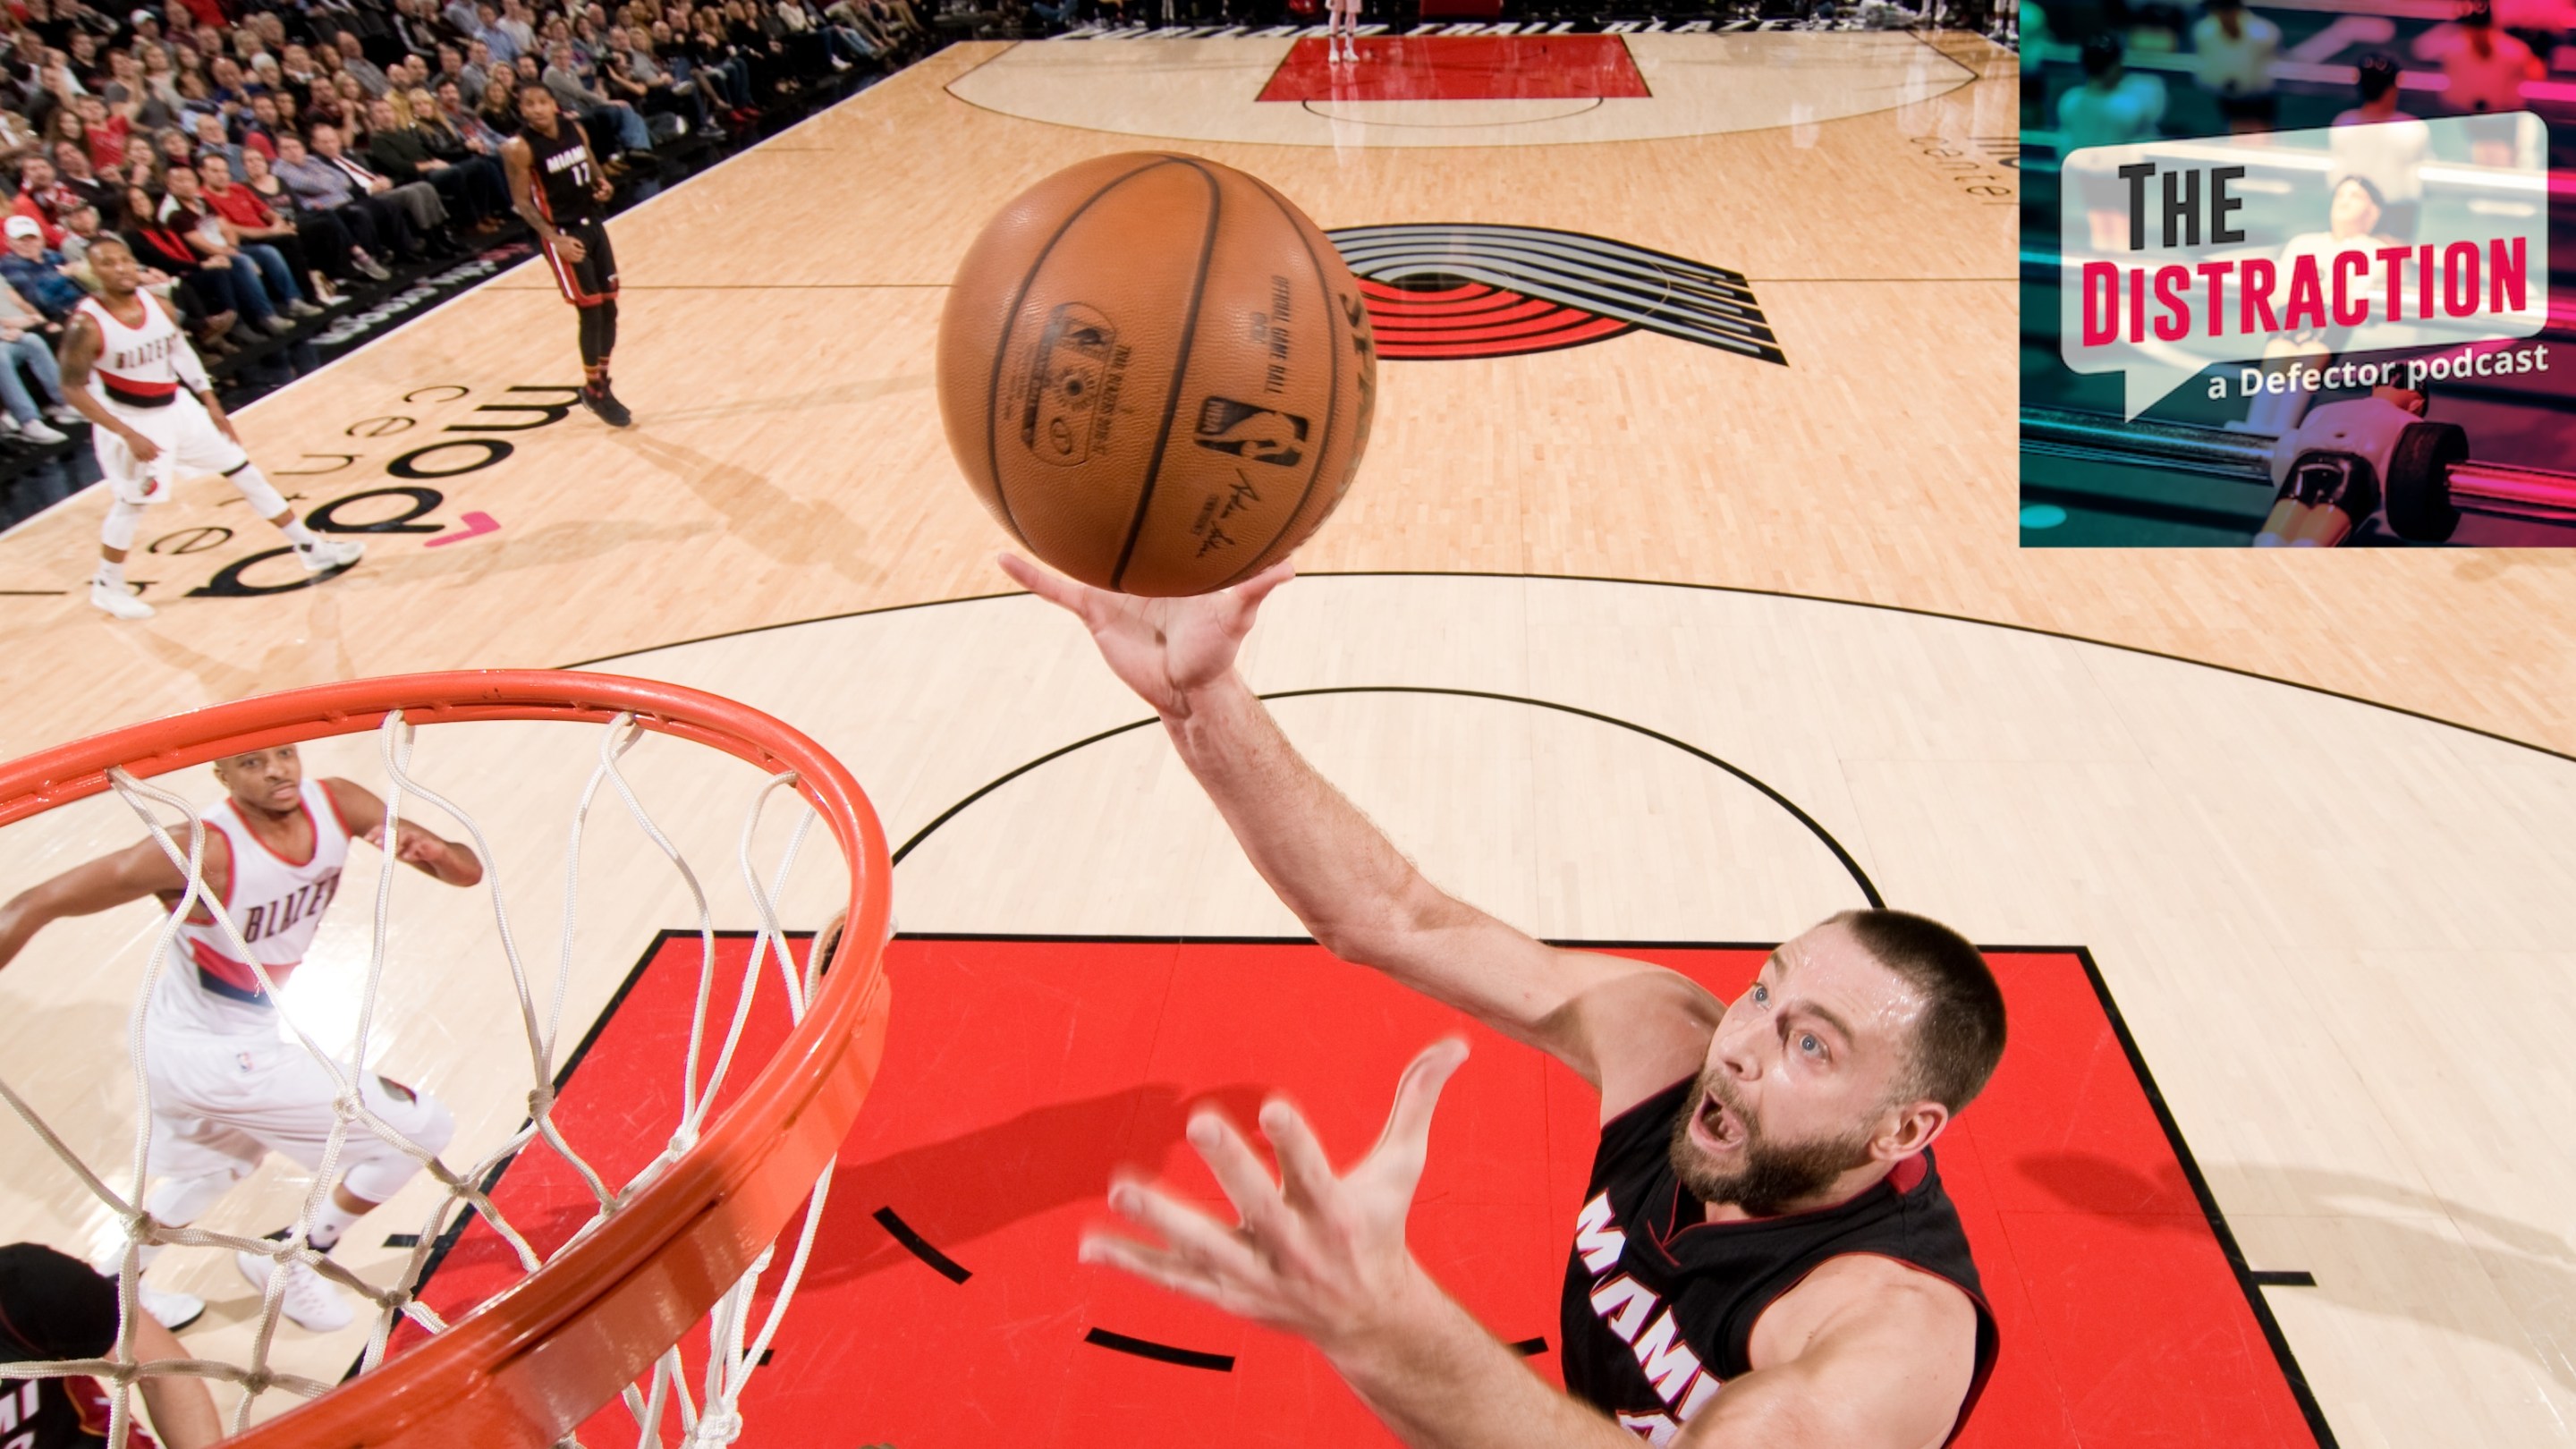 Josh McRoberts of the Miami Heat attacks the hoop in a game agains the Blazers at the Moda Center in Portland in December of 2016.